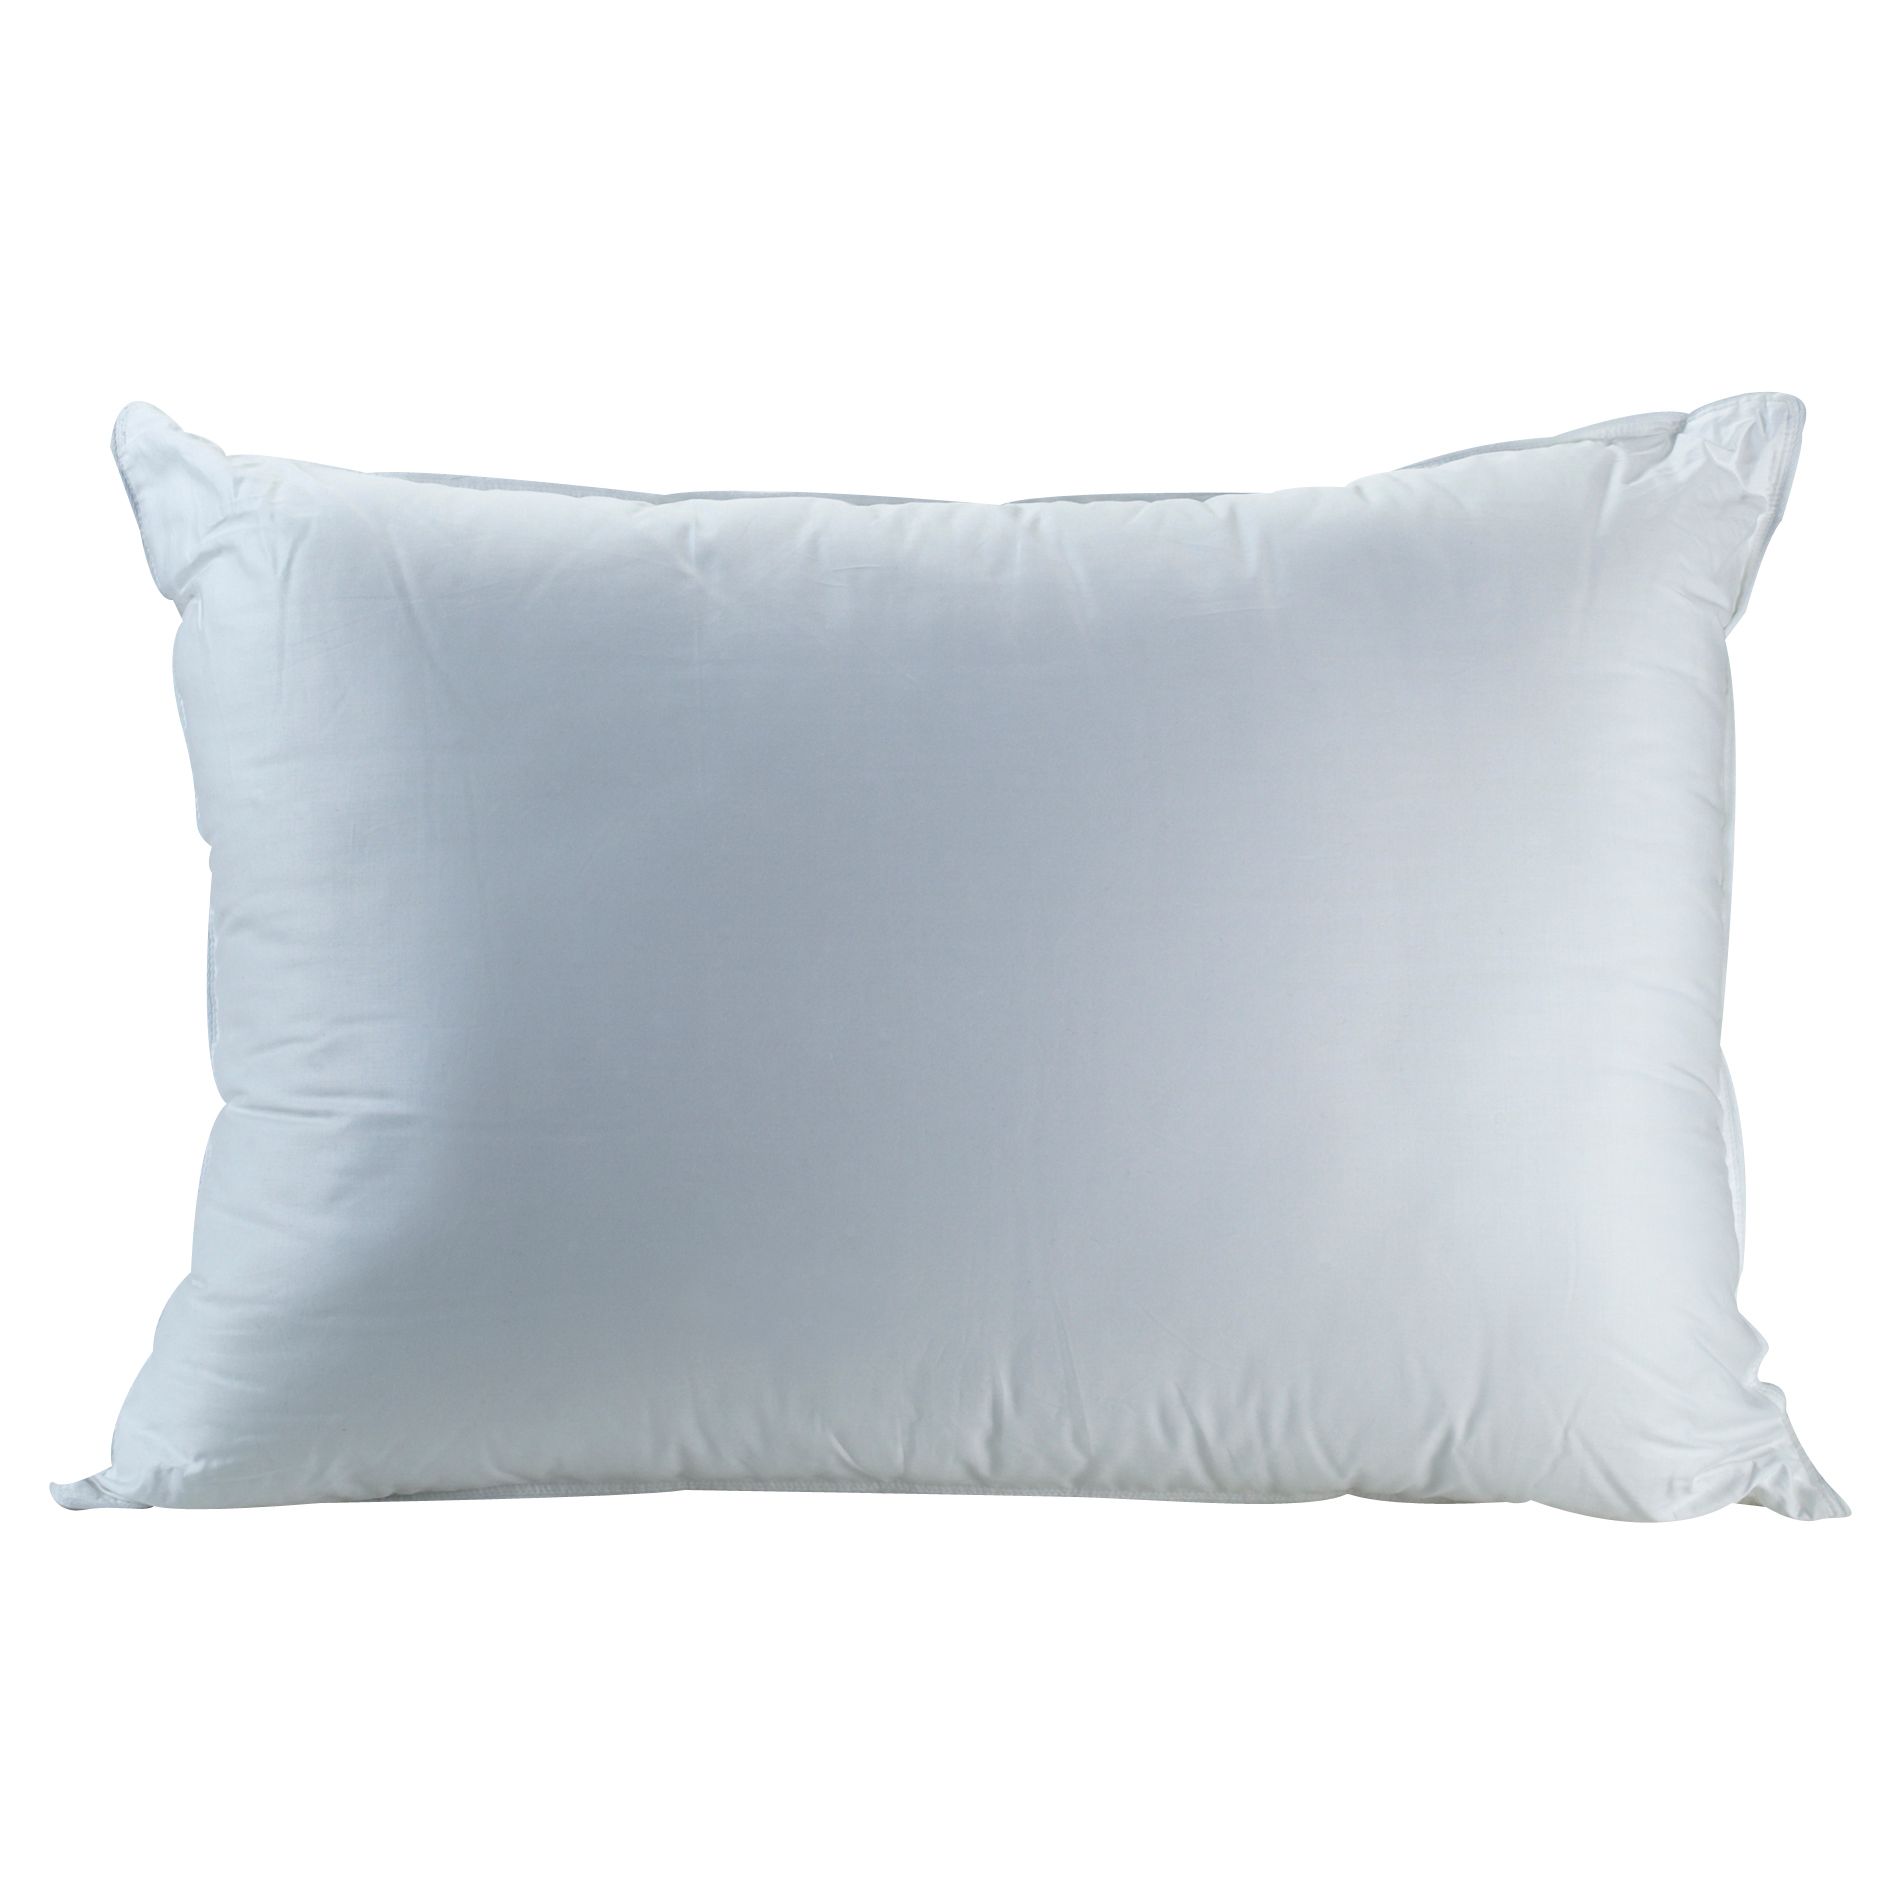 Cannon 400 Thread Count Supima Cotton Gusseted Pillow